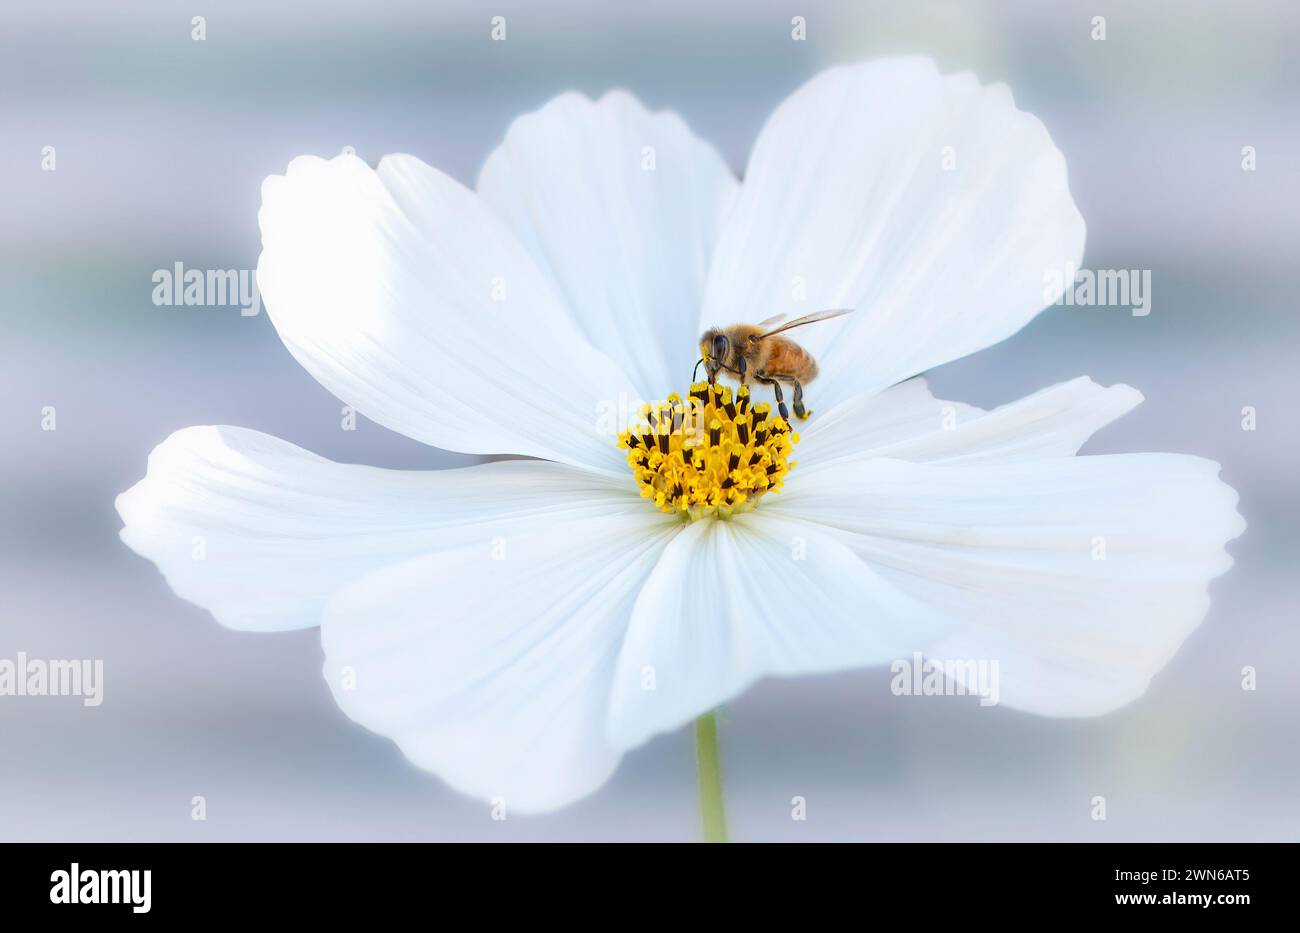 Macro of a honey bee (apis) on a white cosmos flower. Soft background. Stock Photo